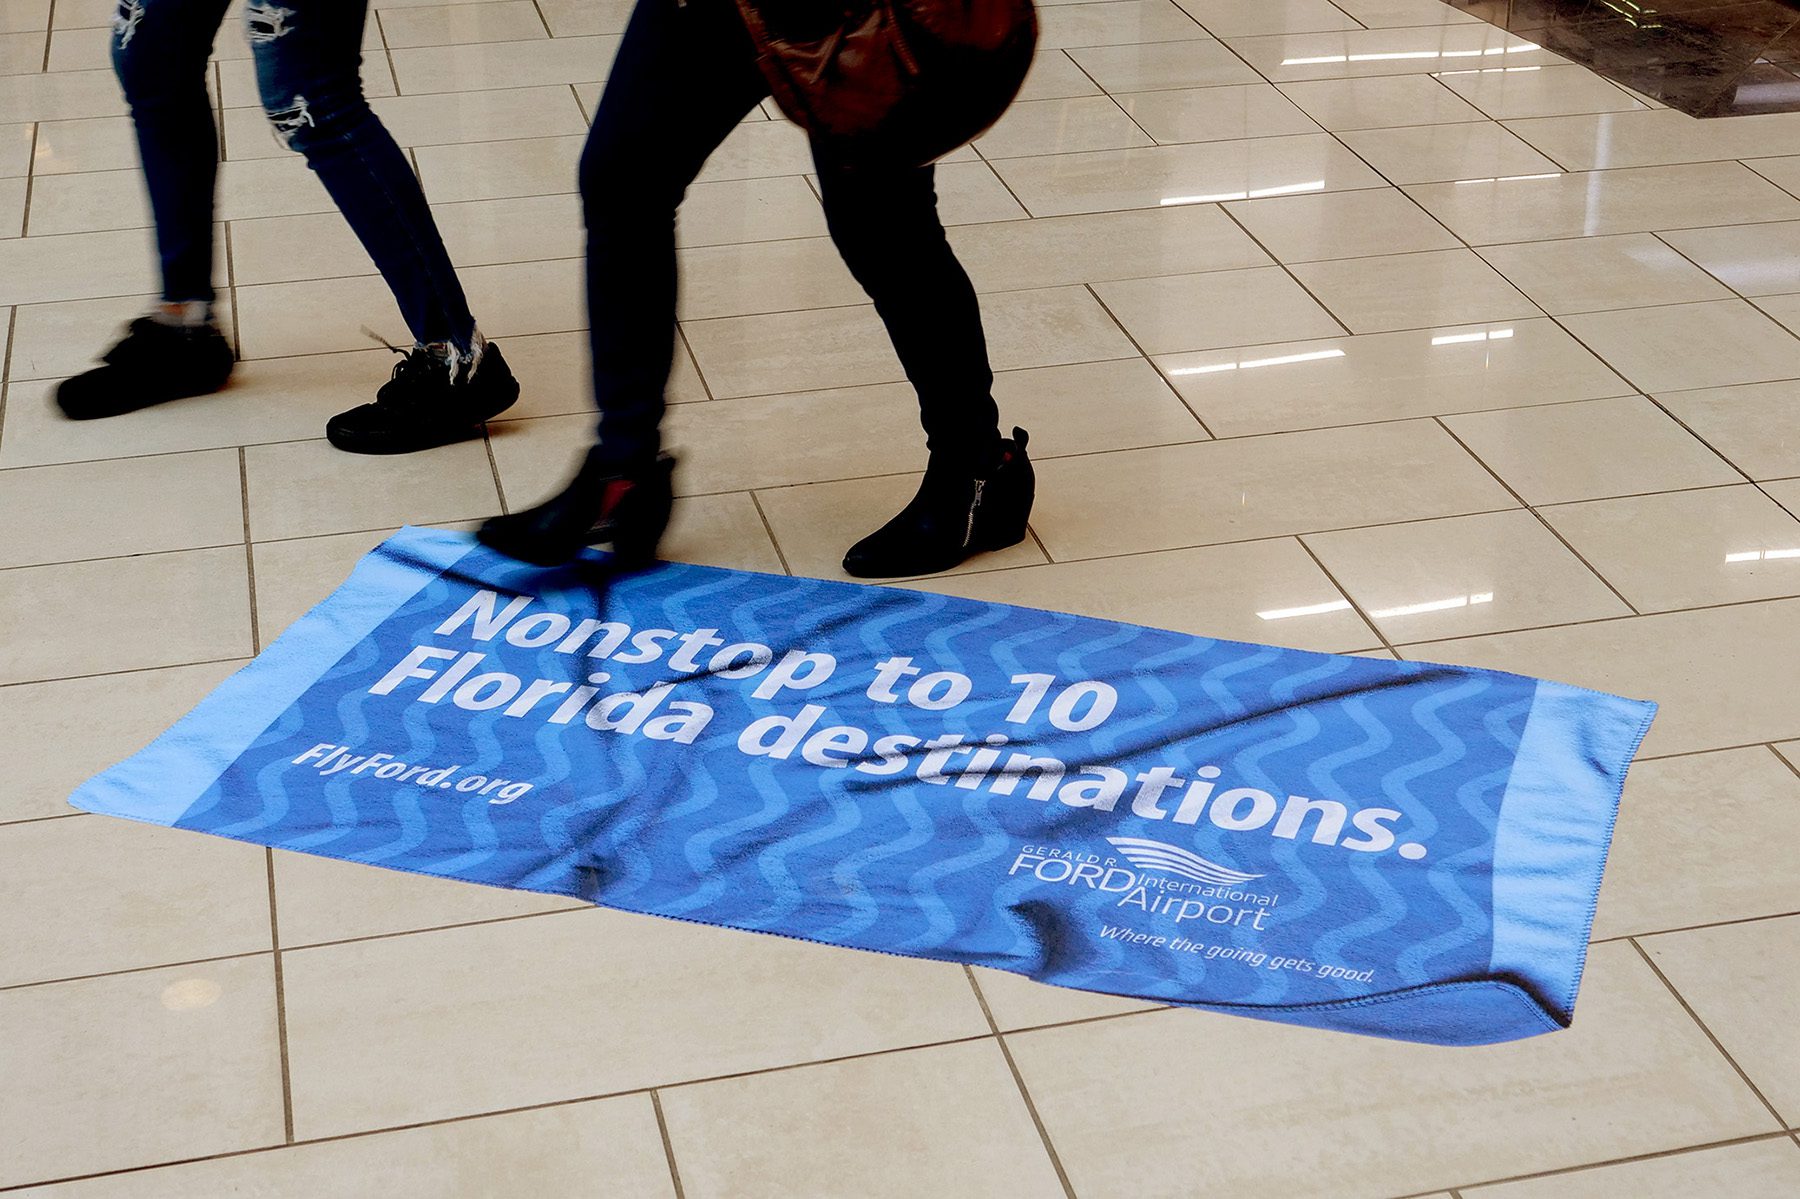 Floor decal resembling a beach towel with the headline "Nonstop to 10 Florida destinations"